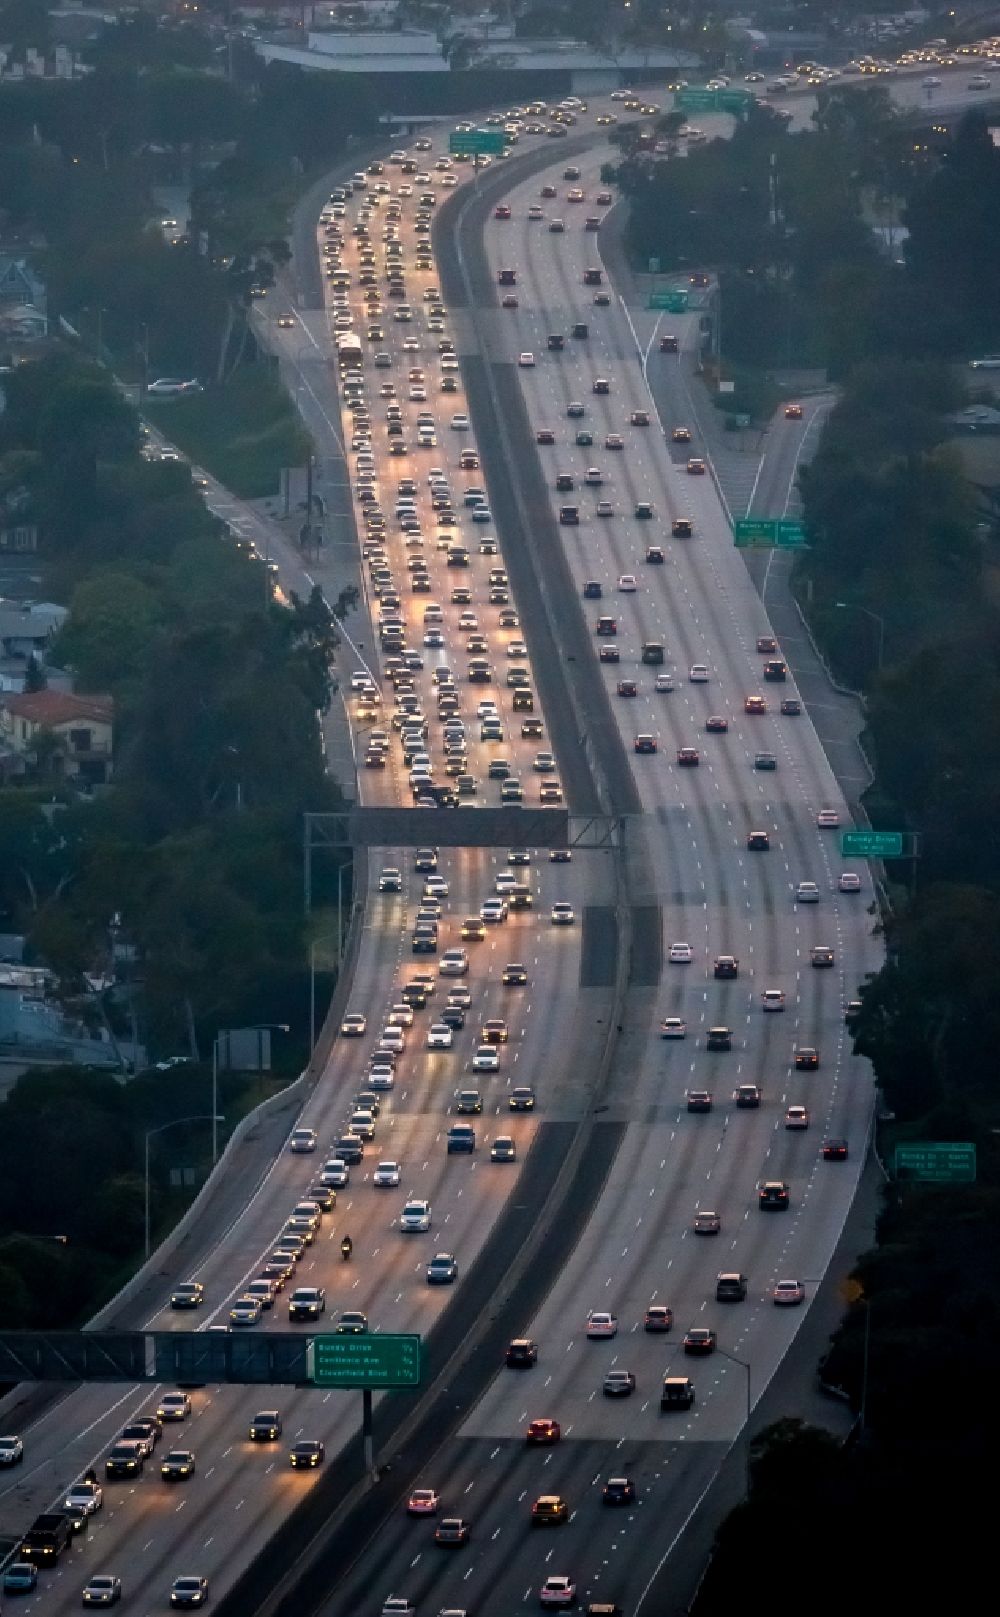 Los Angeles from the bird's eye view: Evening traffic on Santa Monica Freeway Interstate 10 in Los Angeles in California, USA